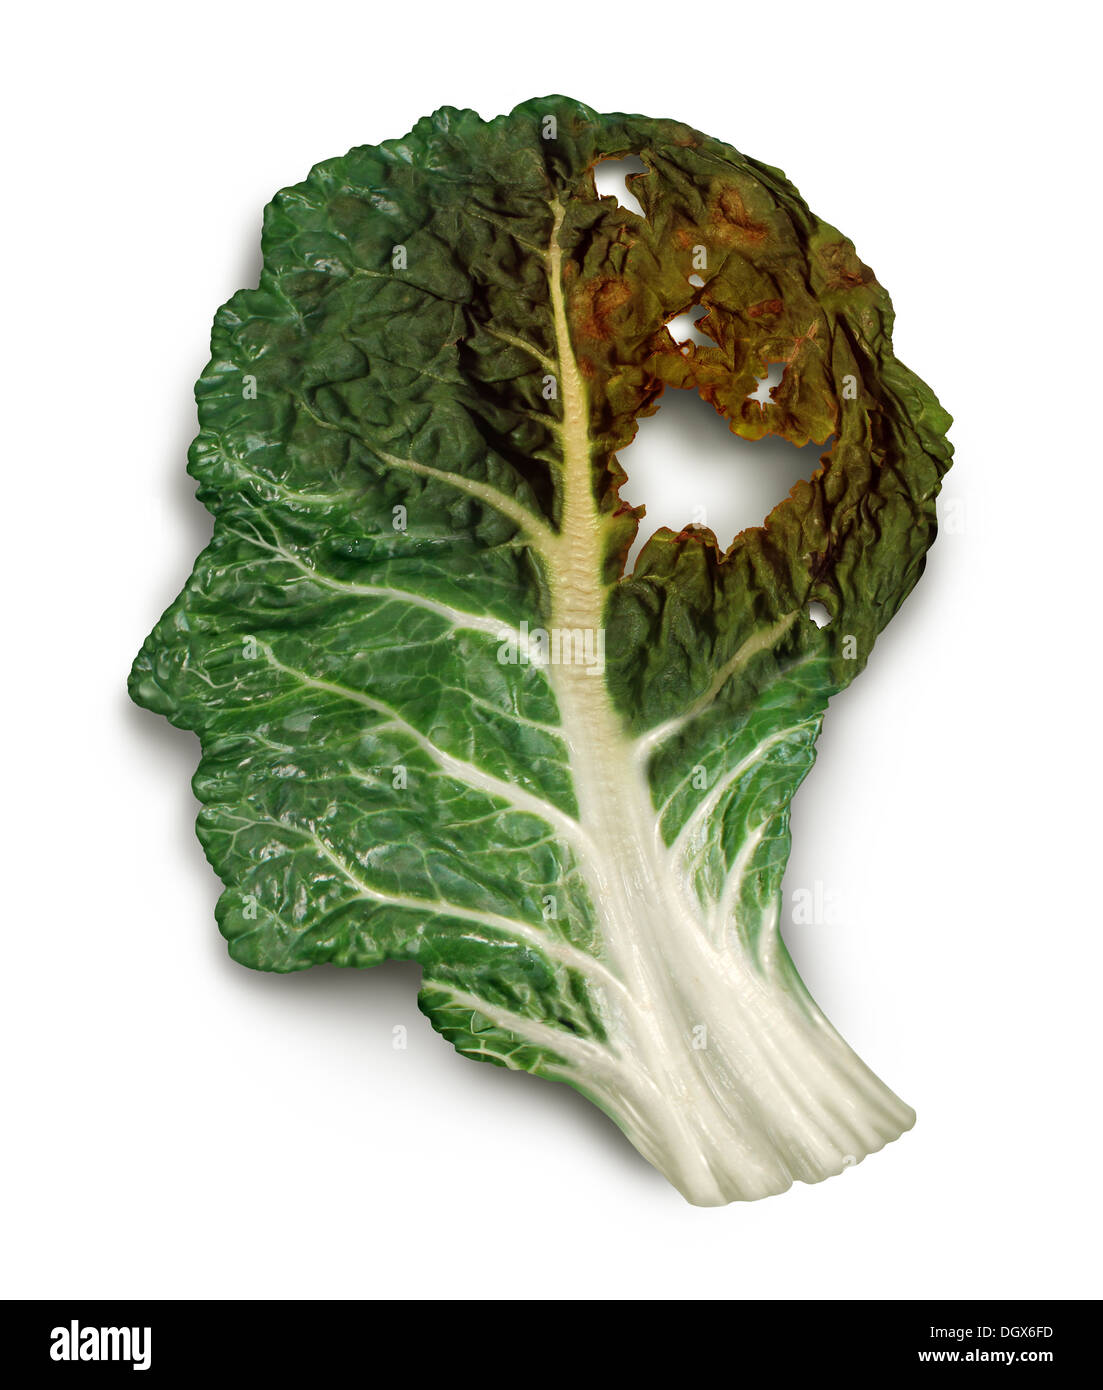 Brain decay disease with memory loss due to Dementia and Alzheimer's illness or cancer icon as a medical symbol of a green kale Stock Photo